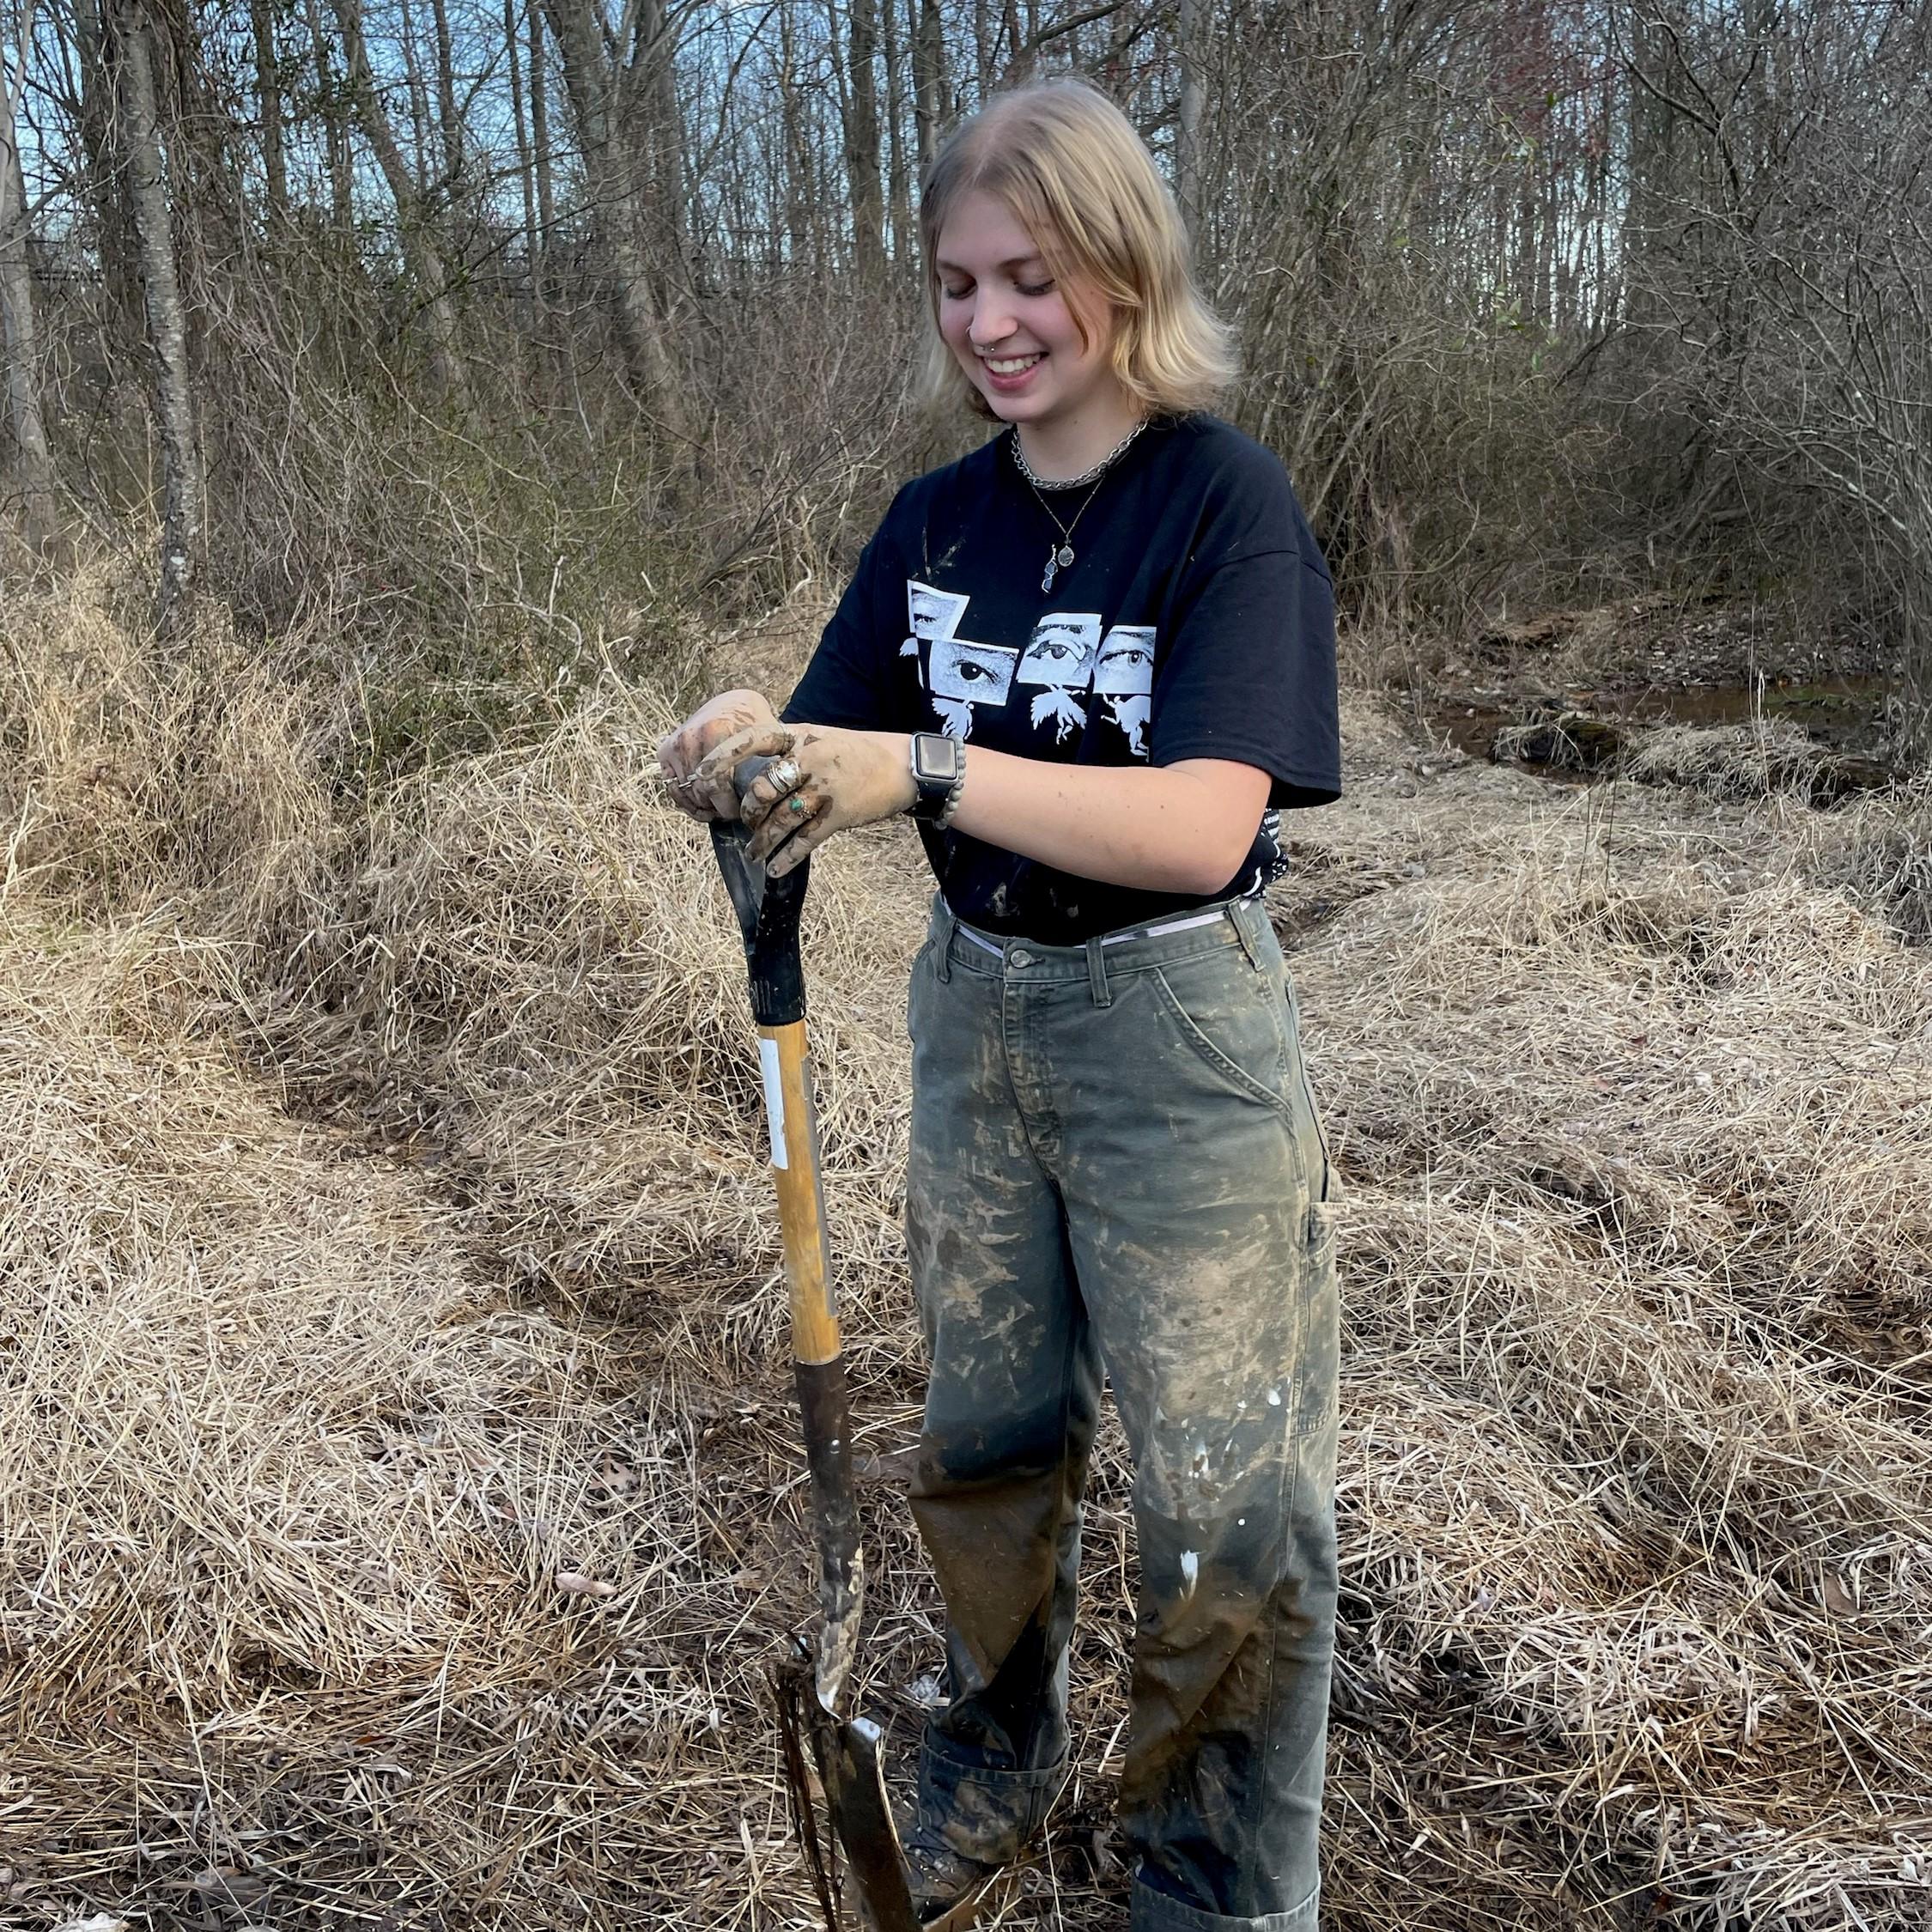 Caroline is holding a shovel and smiling while working with soil in a wetland